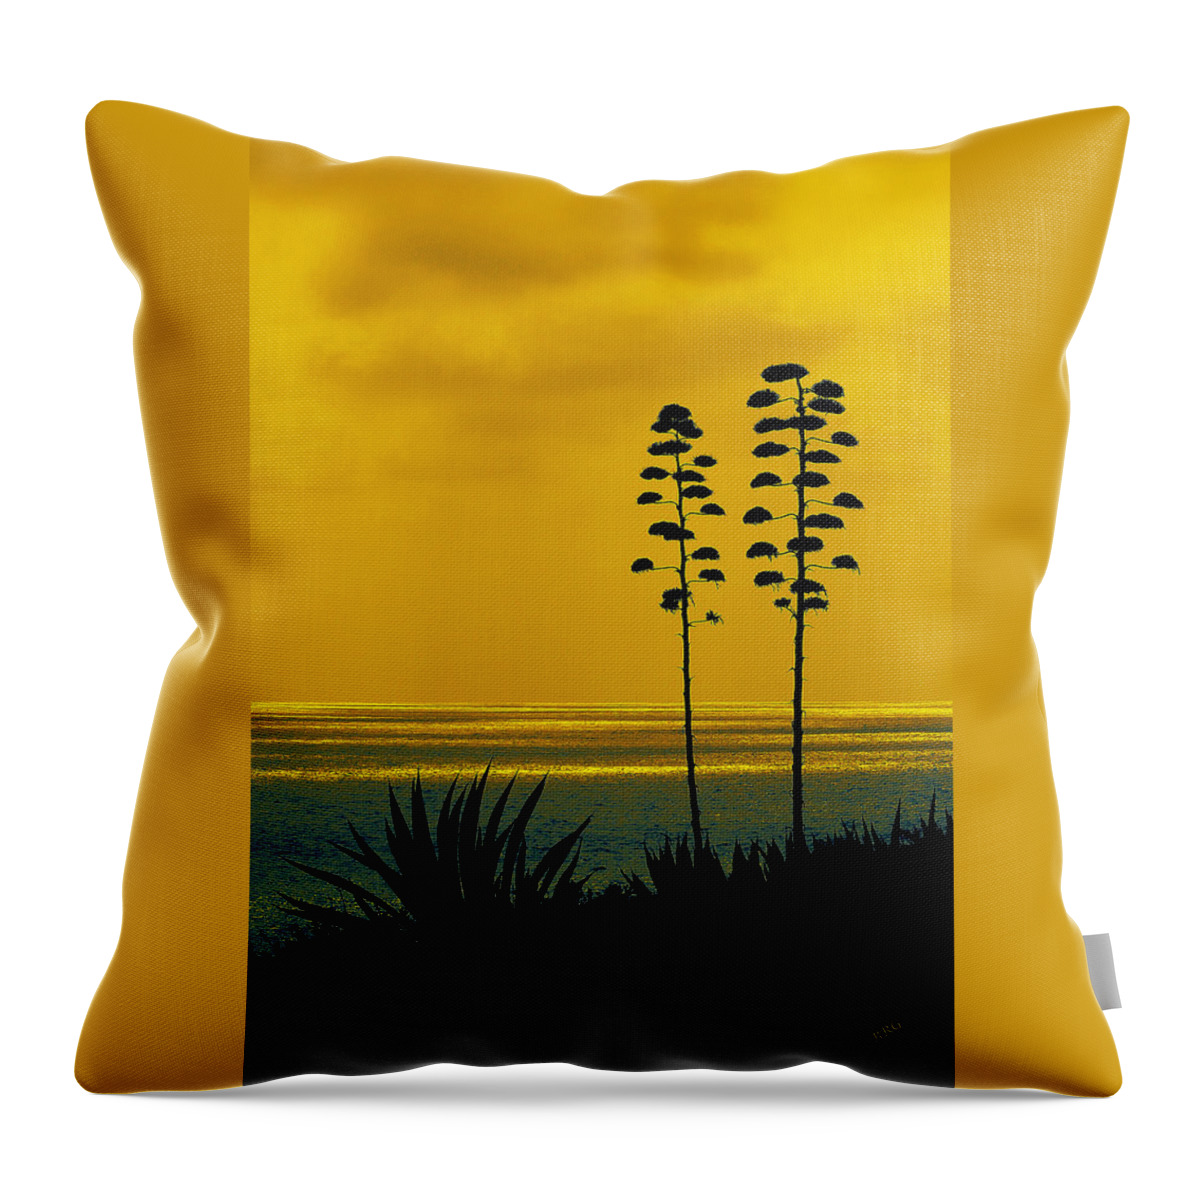 Sunset Throw Pillow featuring the photograph Ocean Sunset With Agave Silhouette by Ben and Raisa Gertsberg